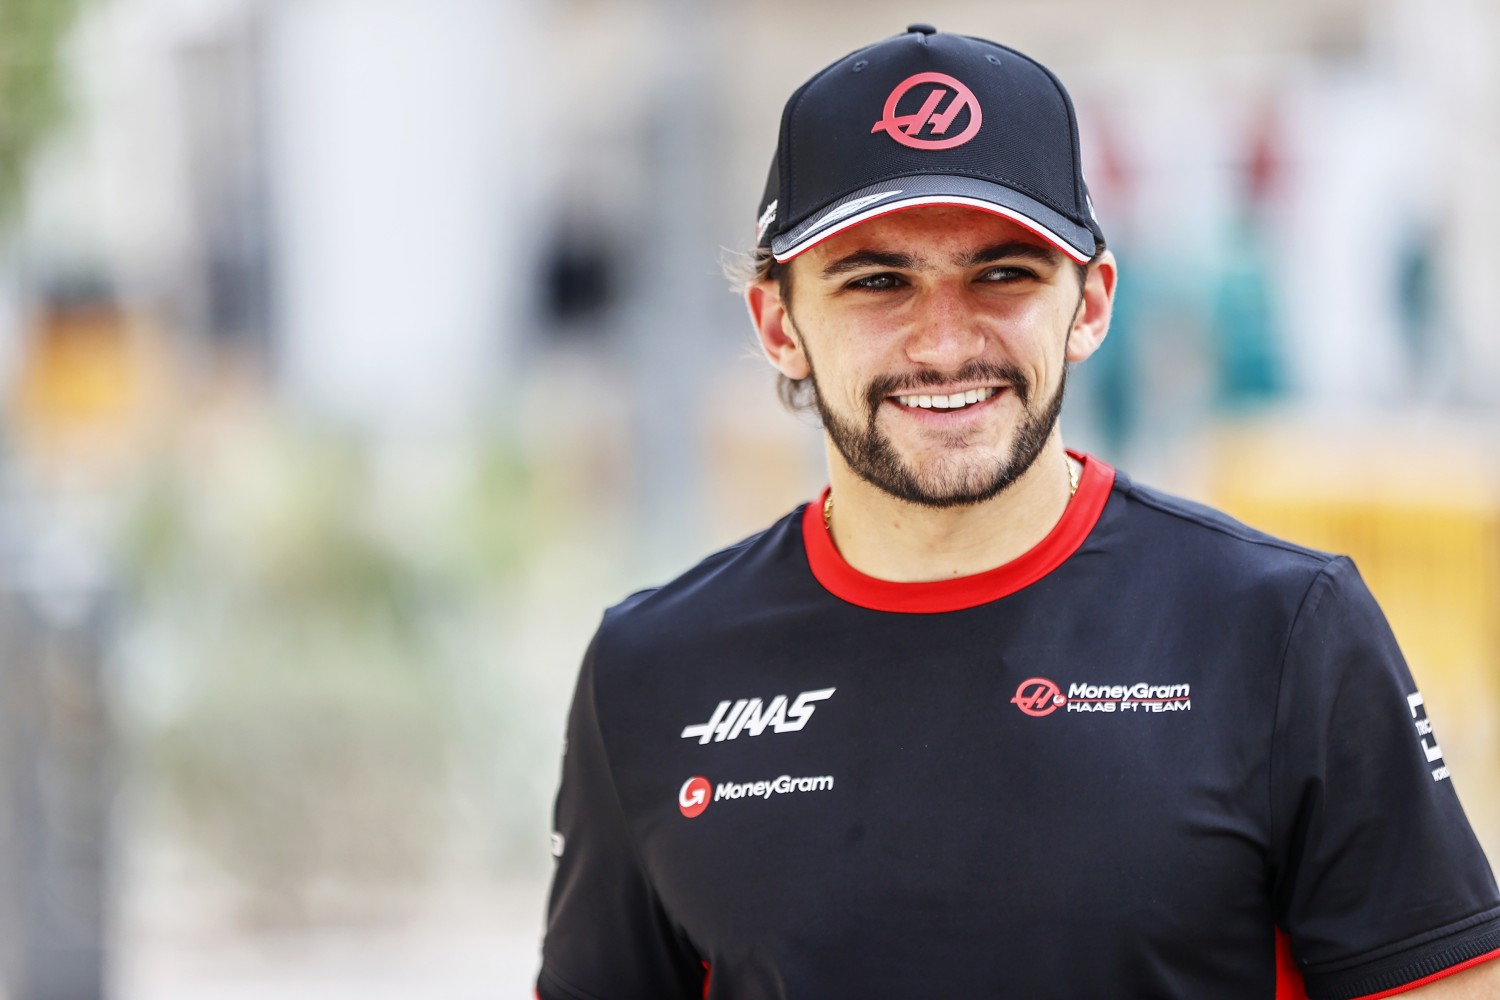 Pietro Fittipaldi, Reserve Driver, Haas F1 Team during the Qatar GP at Losail International Circuit on Thursday October 05, 2023 in Losail, Qatar. (Photo by Andy Hone / LAT Images)